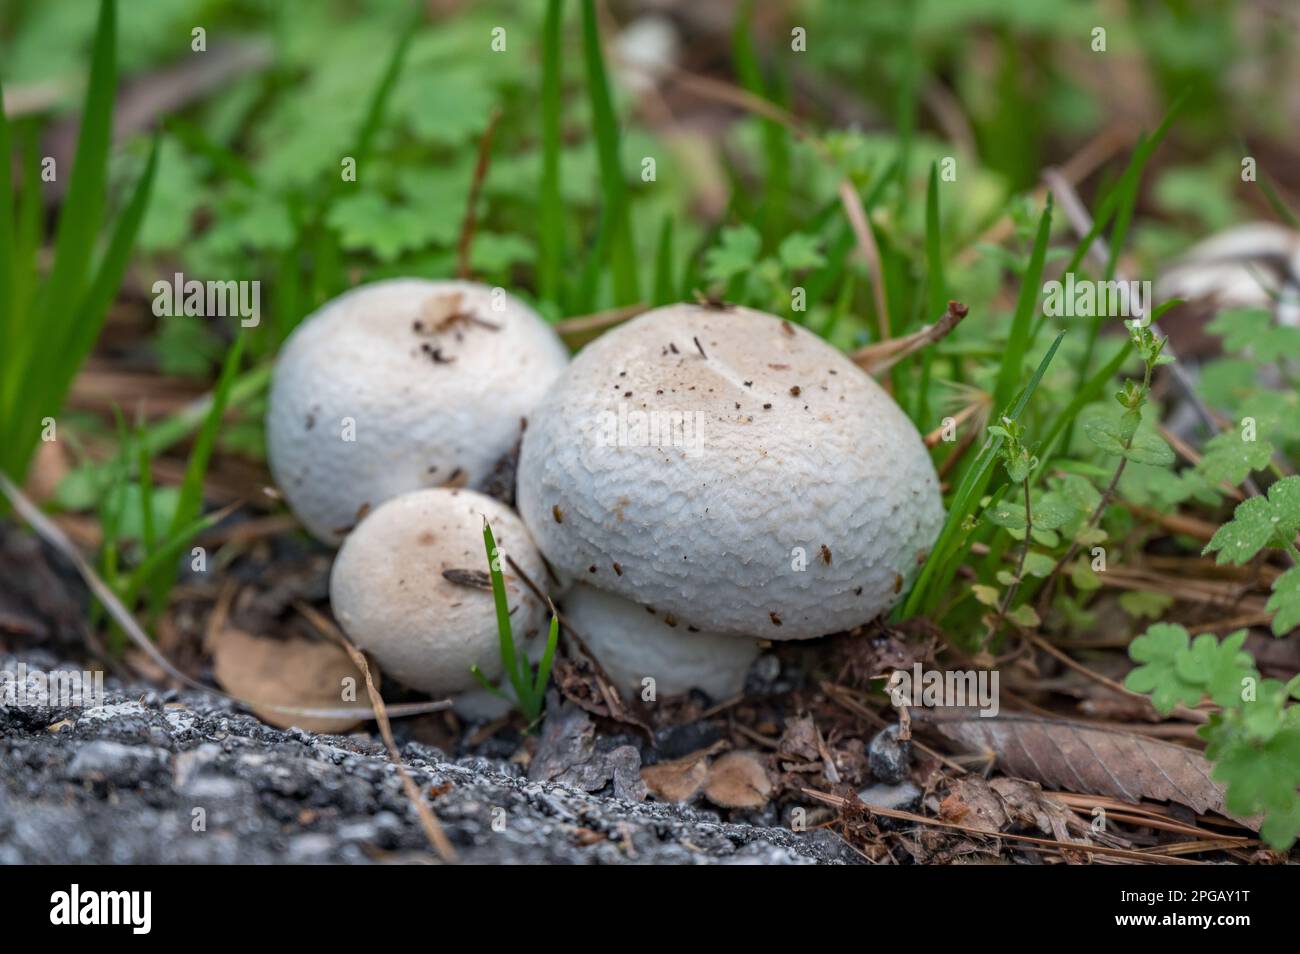 Three Agaricus mushrooms growing next to an asphalt walking path in the forest. Stock Photo